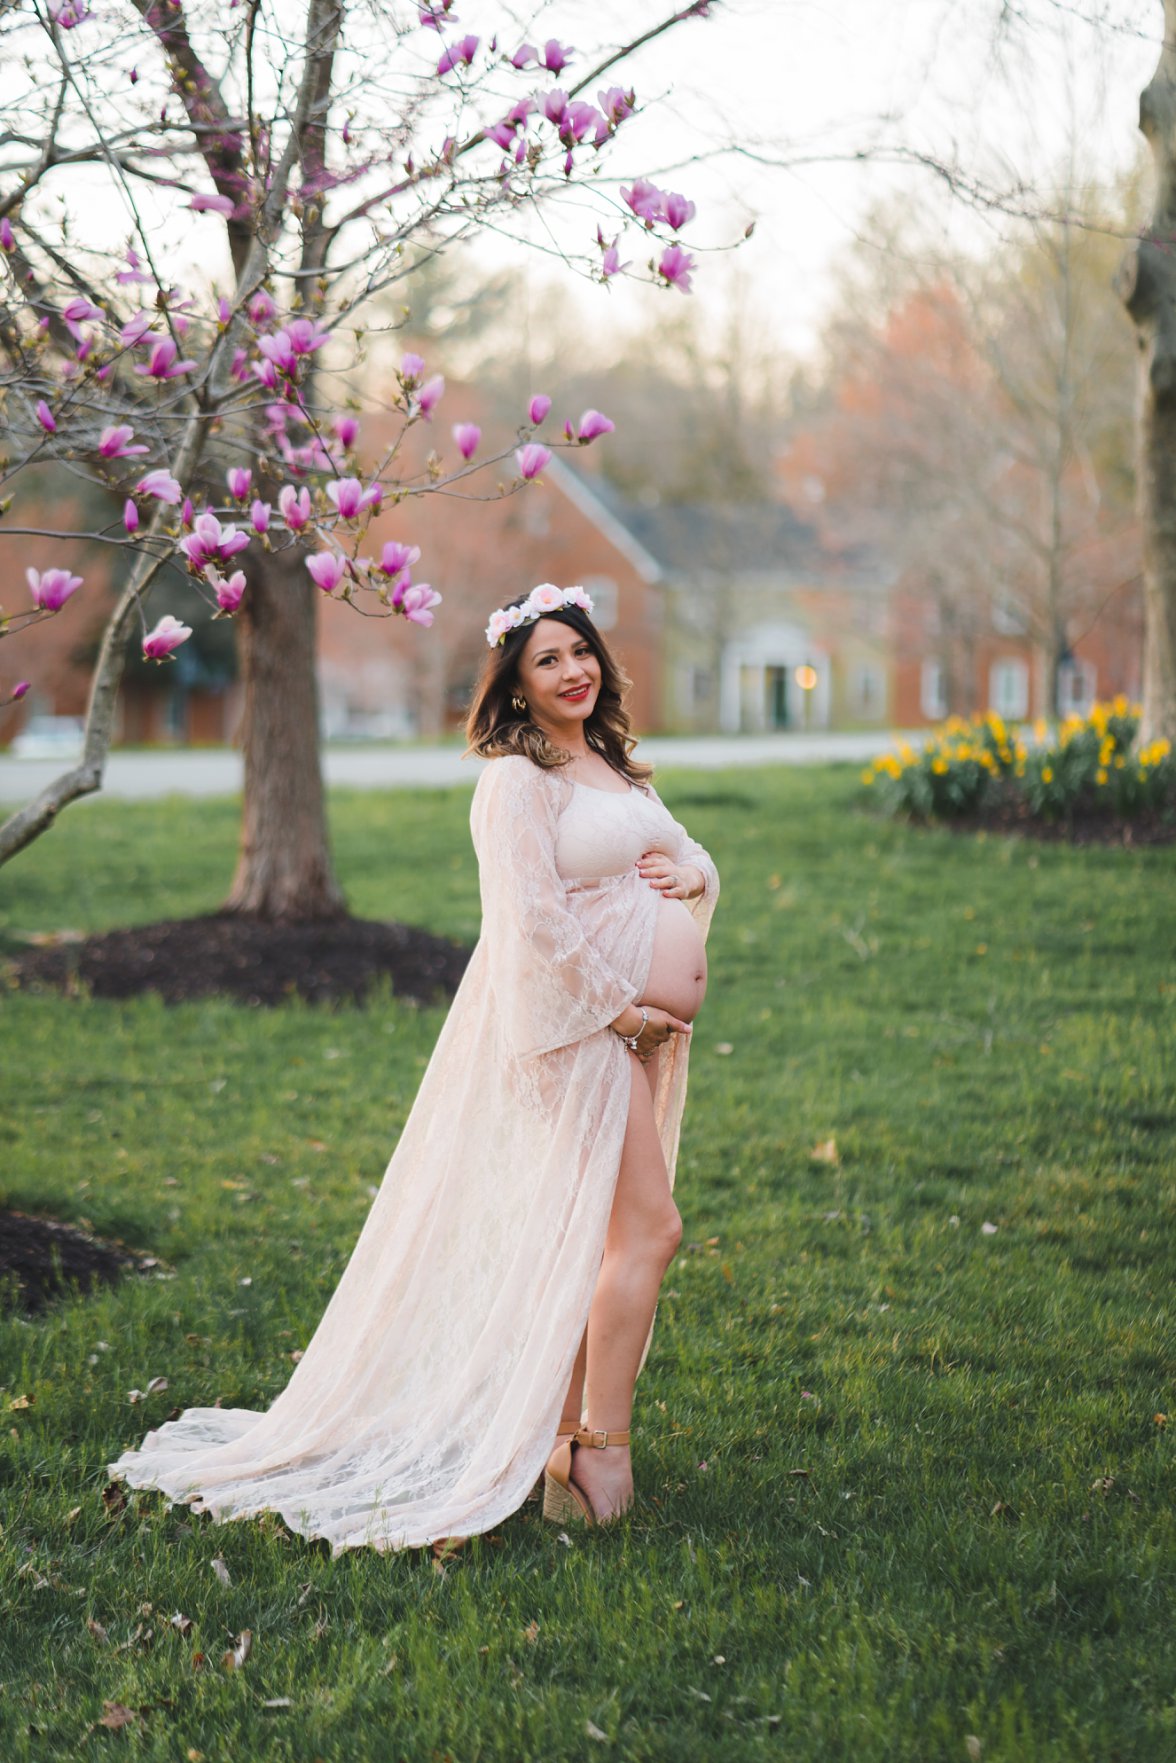 pregnant woman standing in flower blooms | maternity photographer dayton